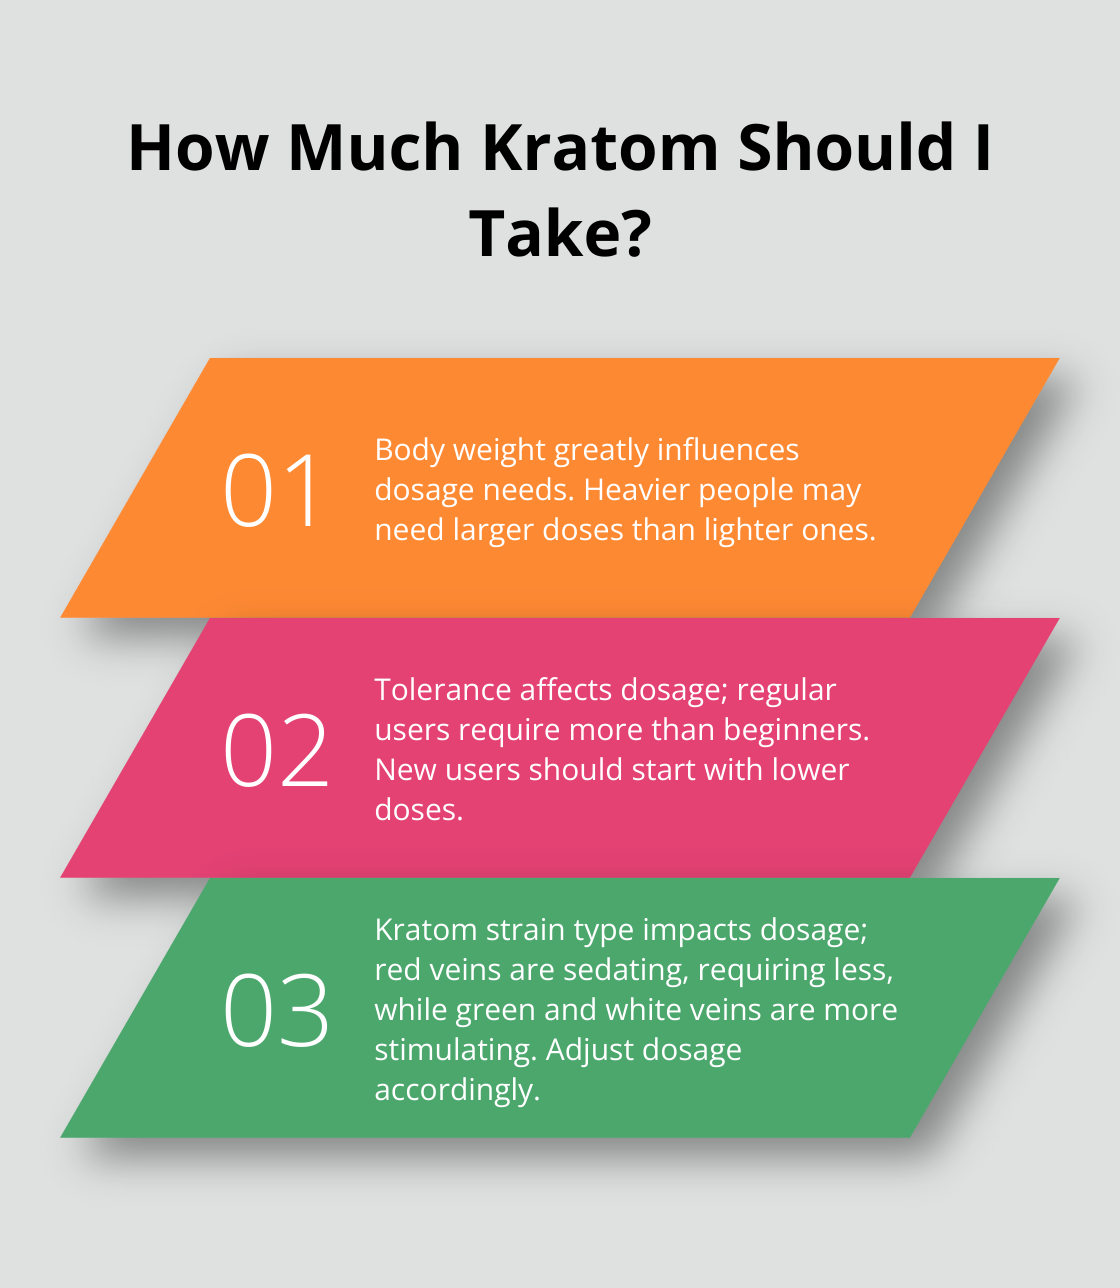 Fact - How Much Kratom Should I Take?